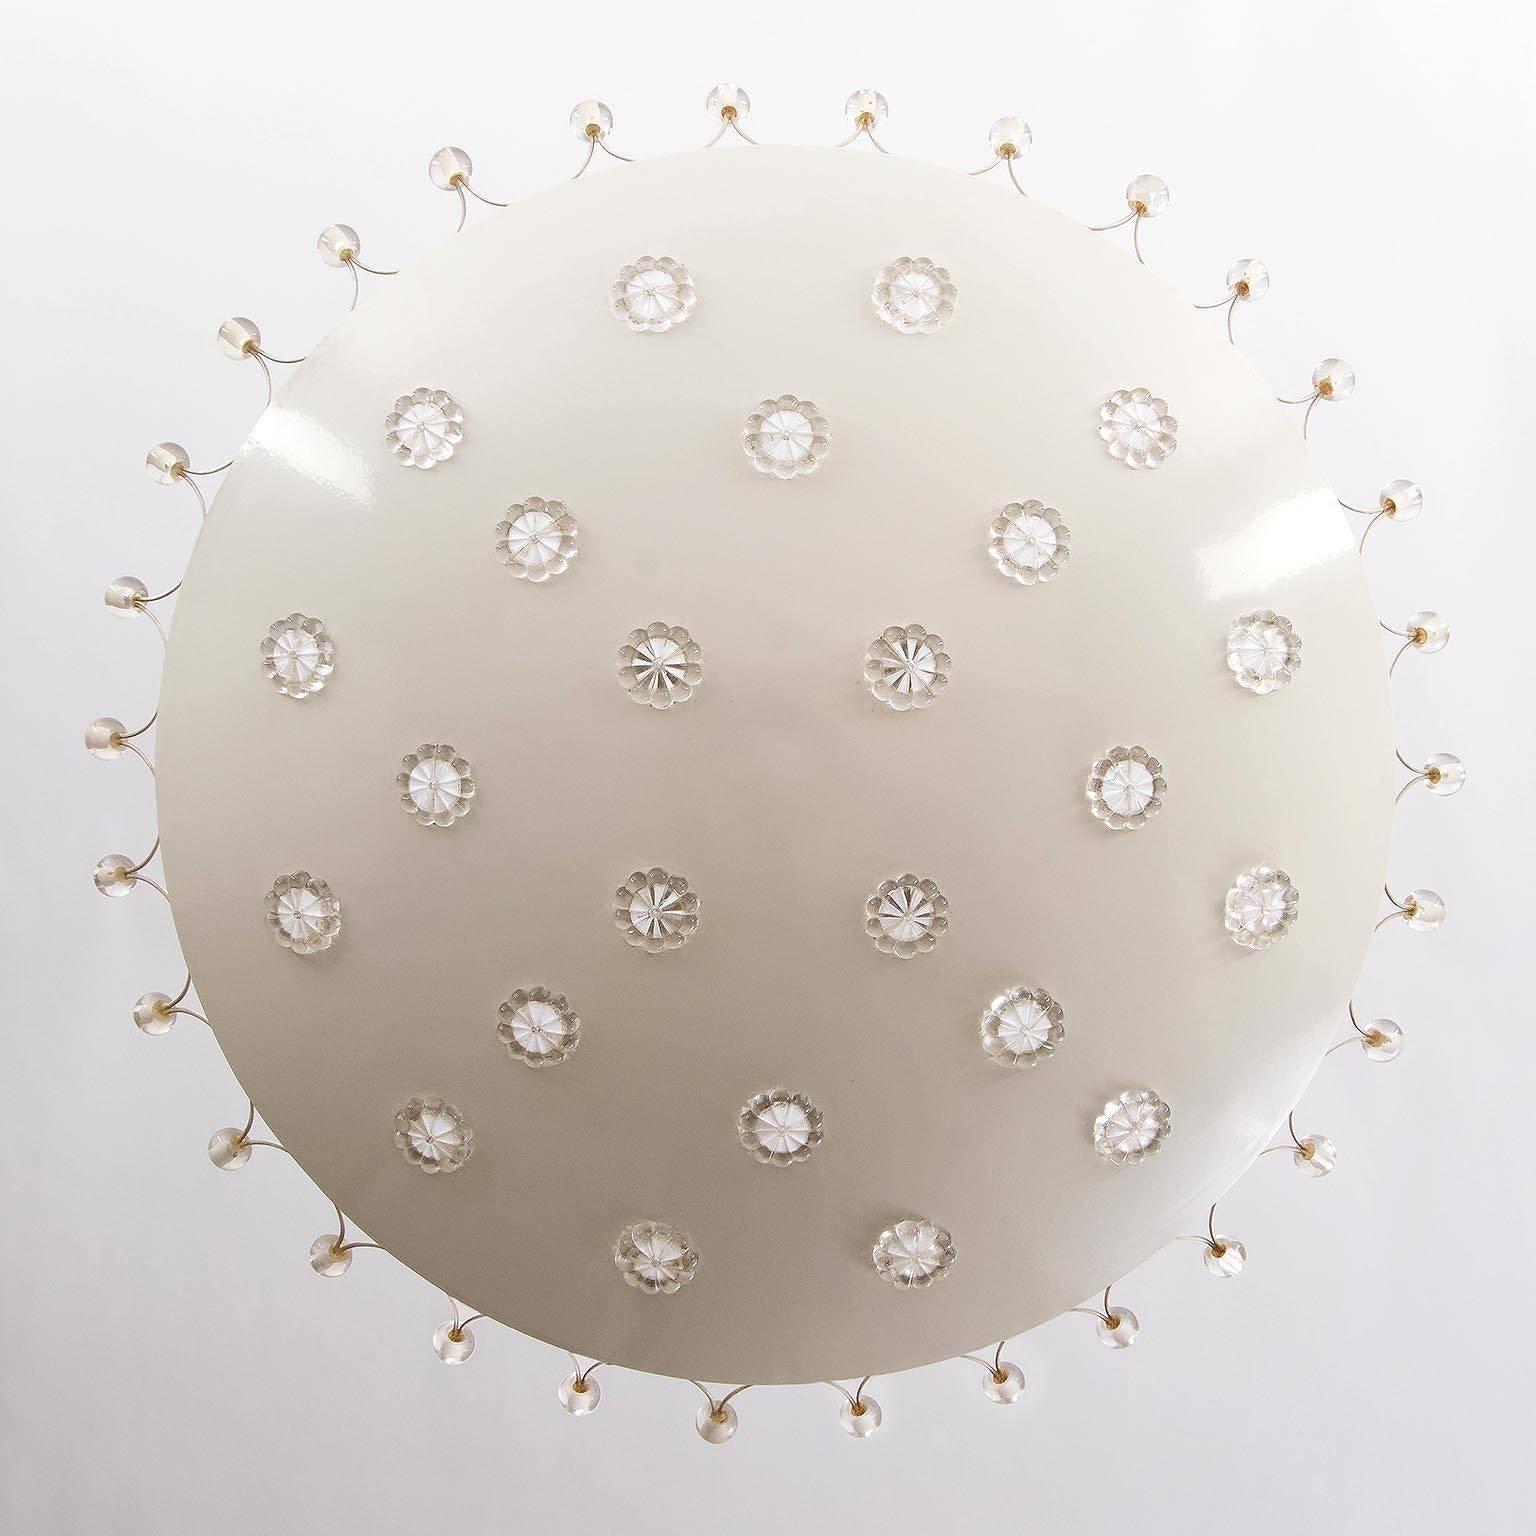 A beautiful ceiling uplight lamp designed by Emil Stejnar for Rupert Nikoll, Austria, circa 1950. It is made of a white enameled dome-shaped metal base with glass blossoms and round glass beads. This is the larger version with four medium or